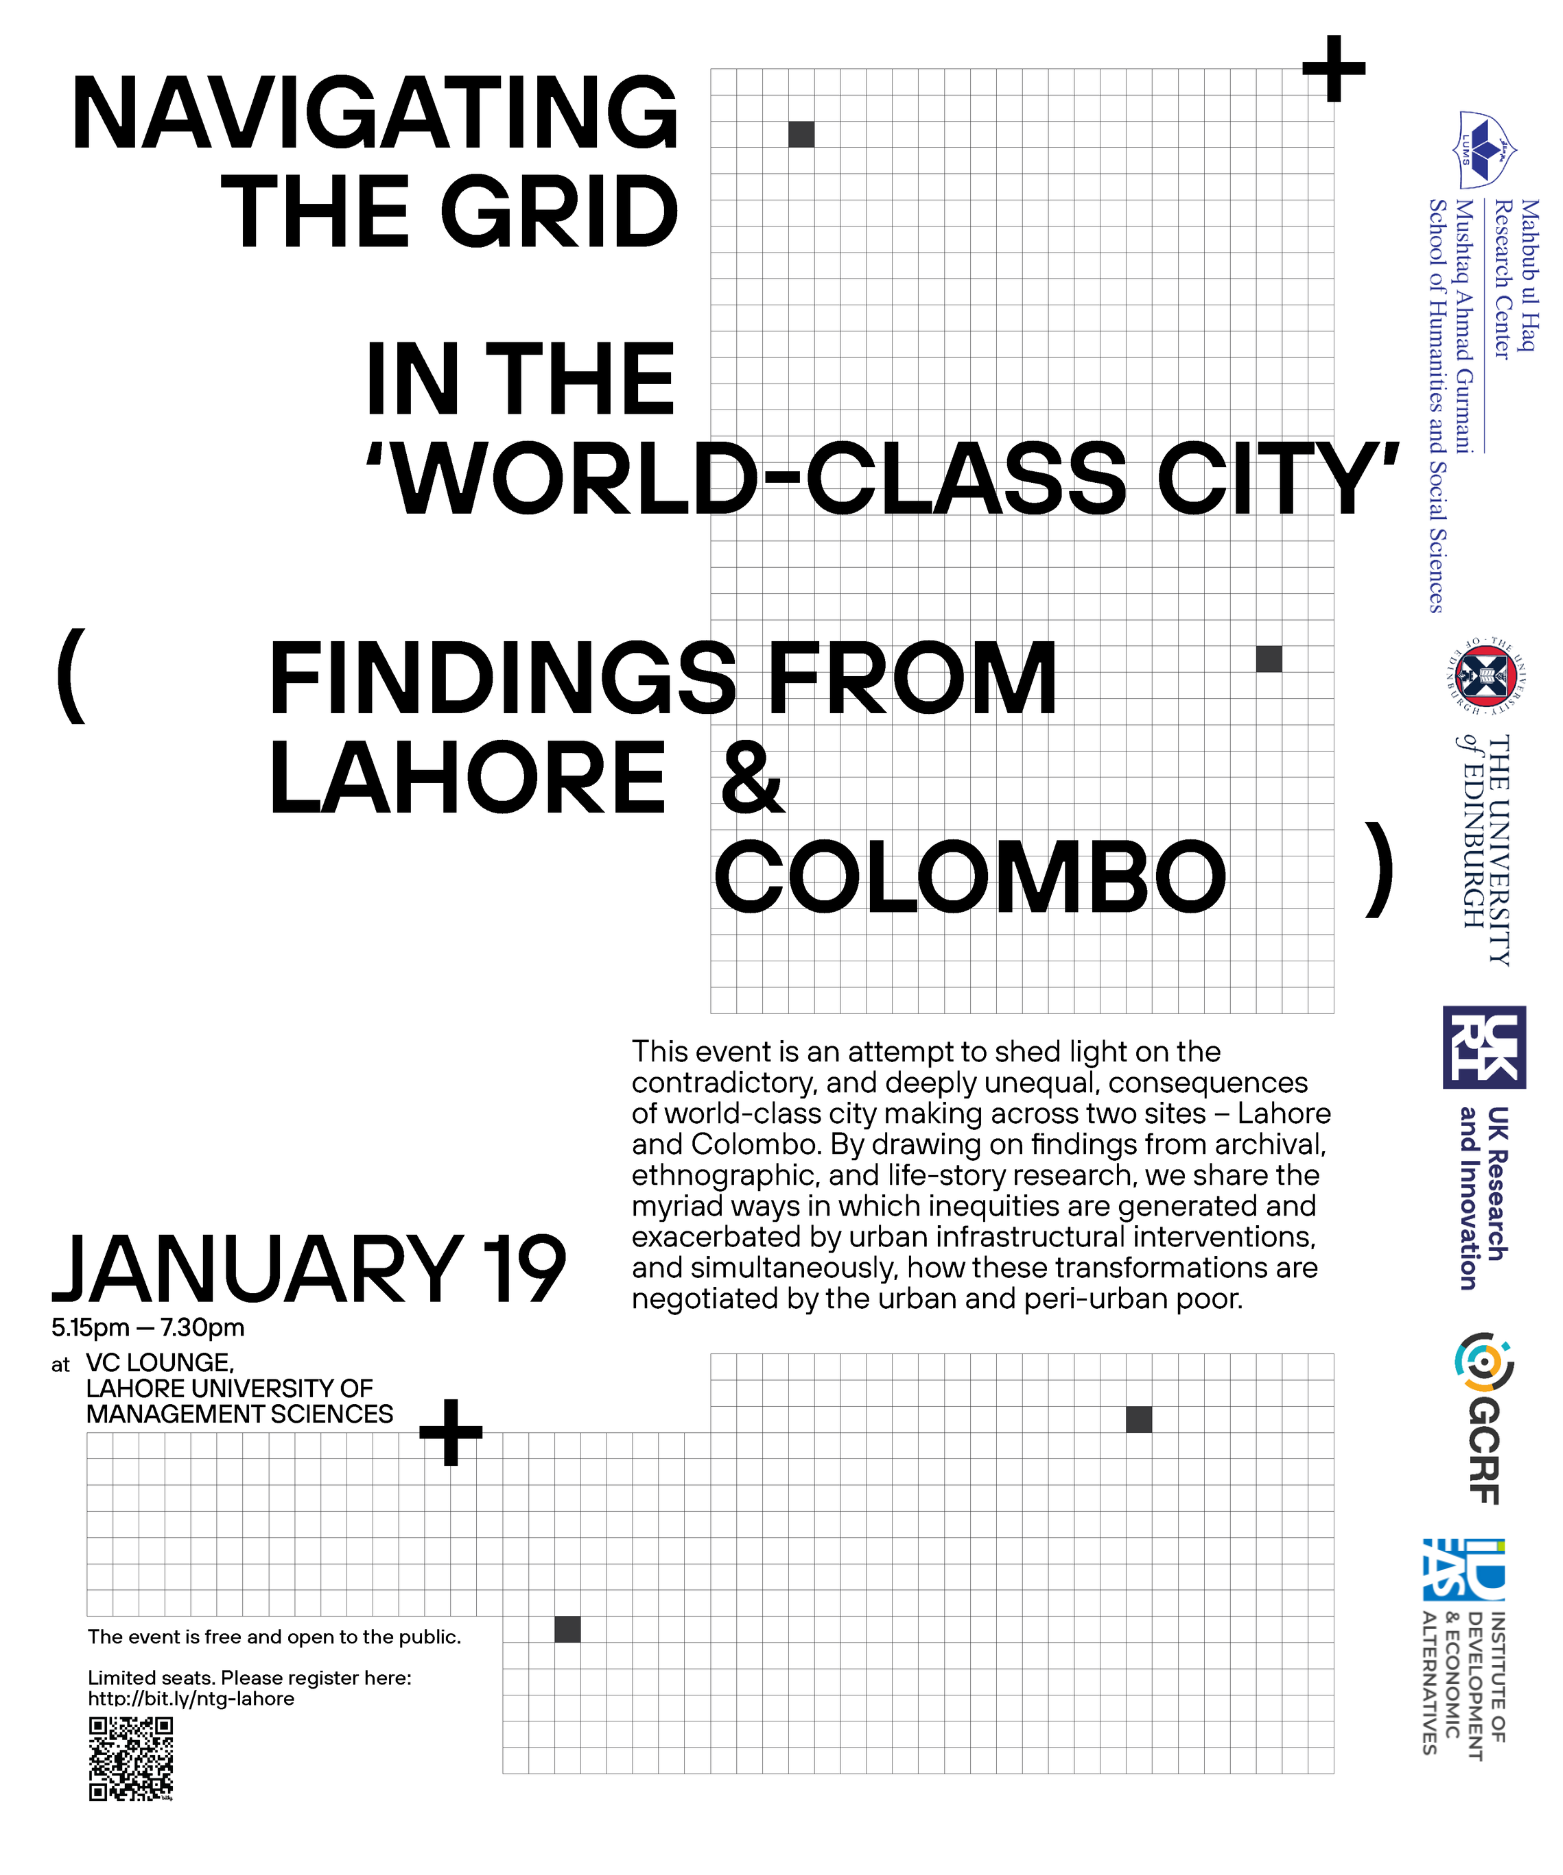 Navigating the Grid in the ‘World-Class City’ - Findings from Lahore and Colombo